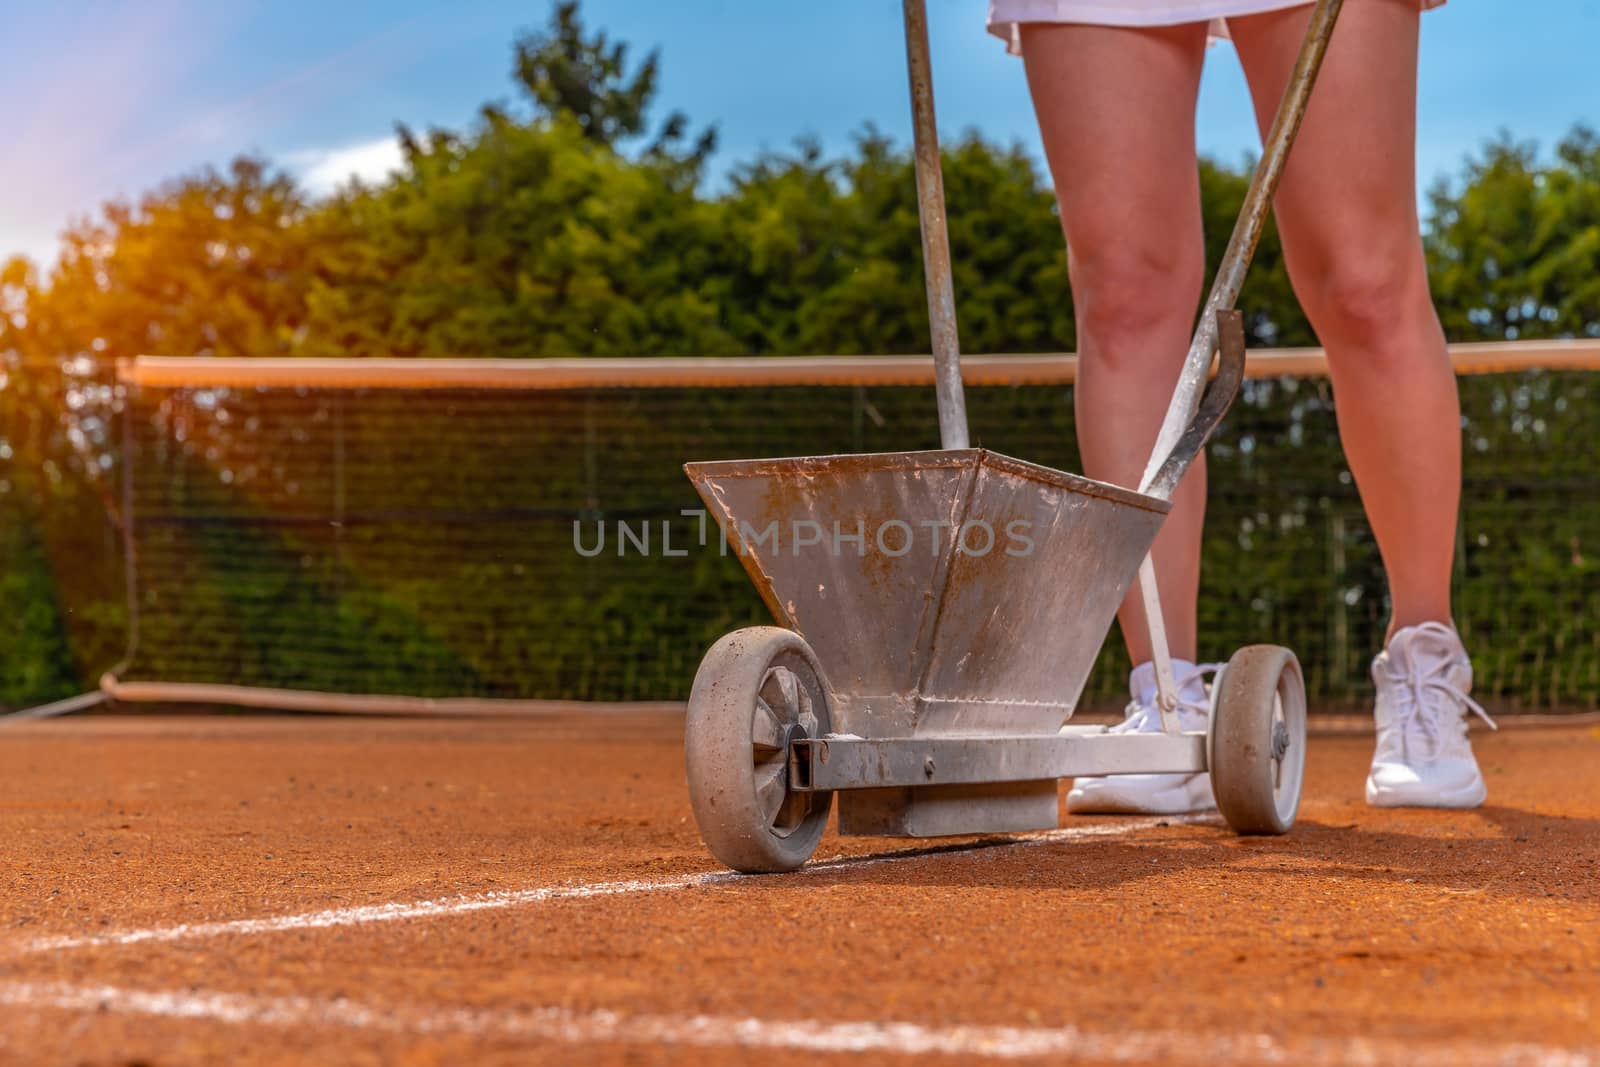 maintenance and repair of tennis courts. drawing white lines with lime by Edophoto